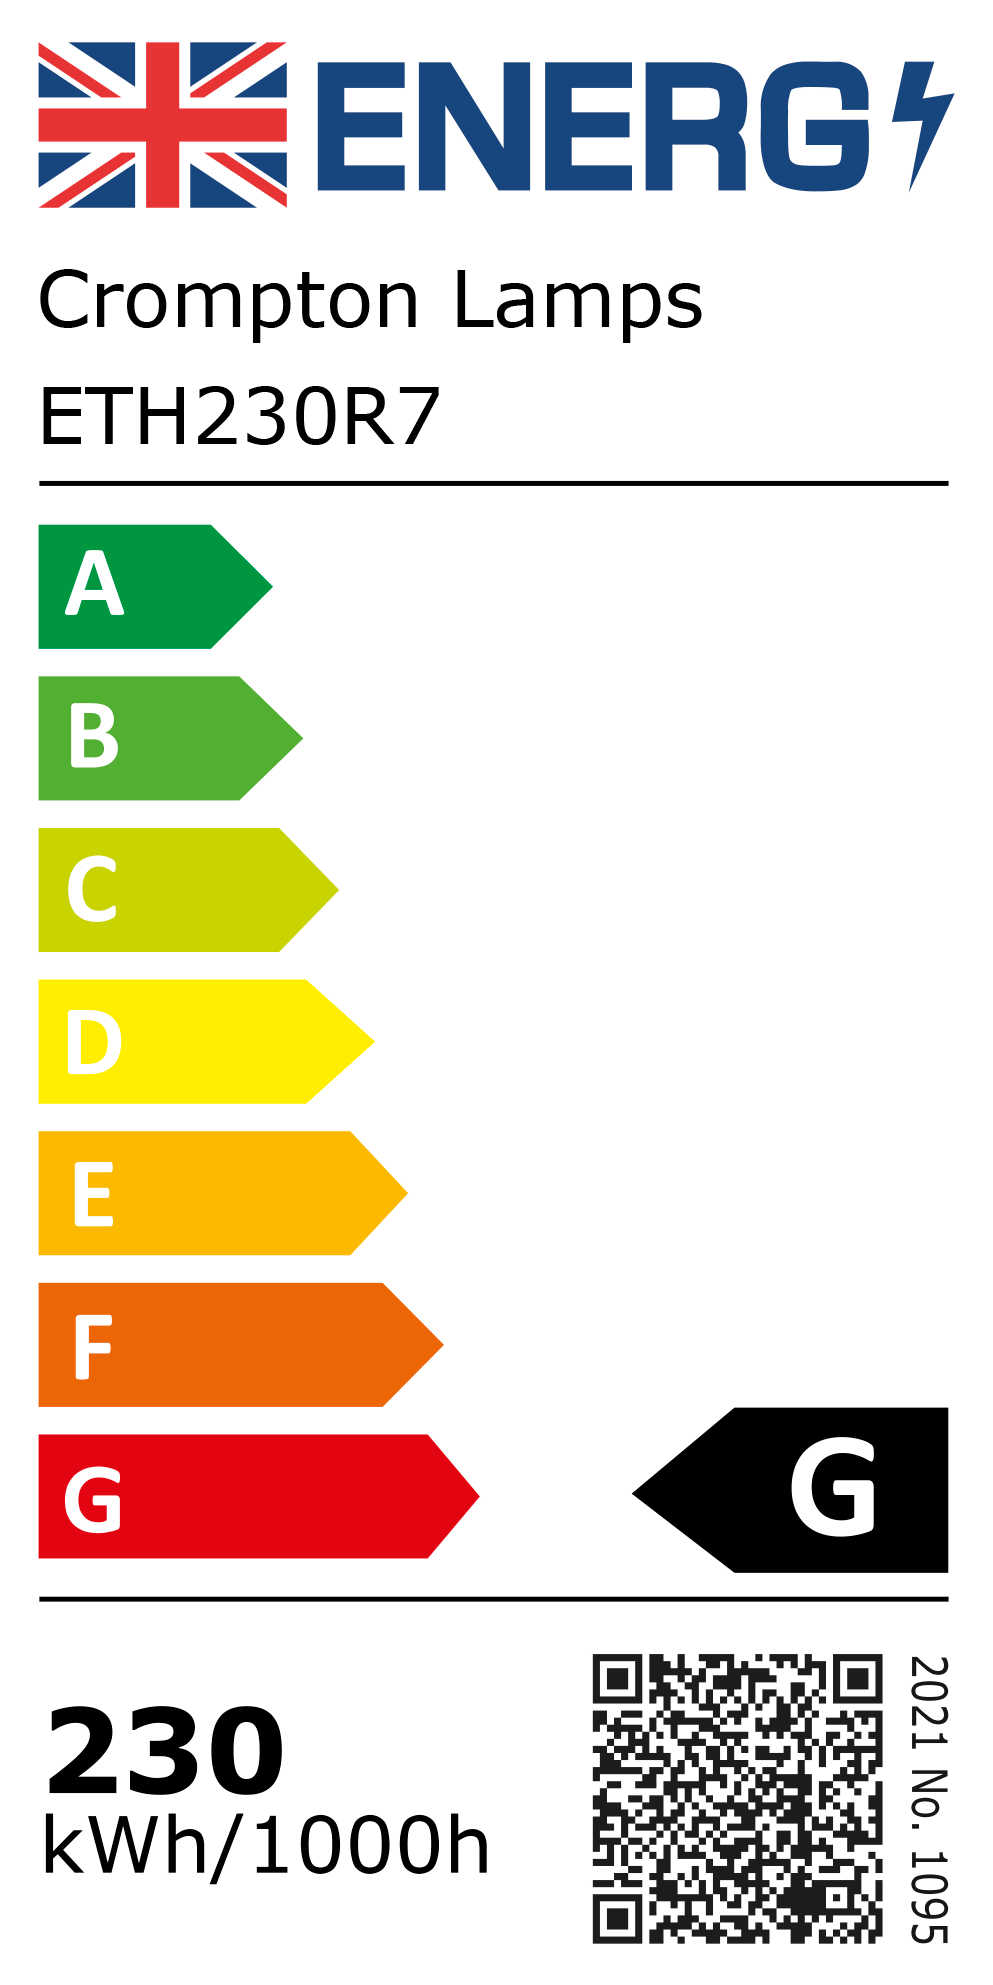 New 2021 Energy Rating Label: Stock Code ETH230R7